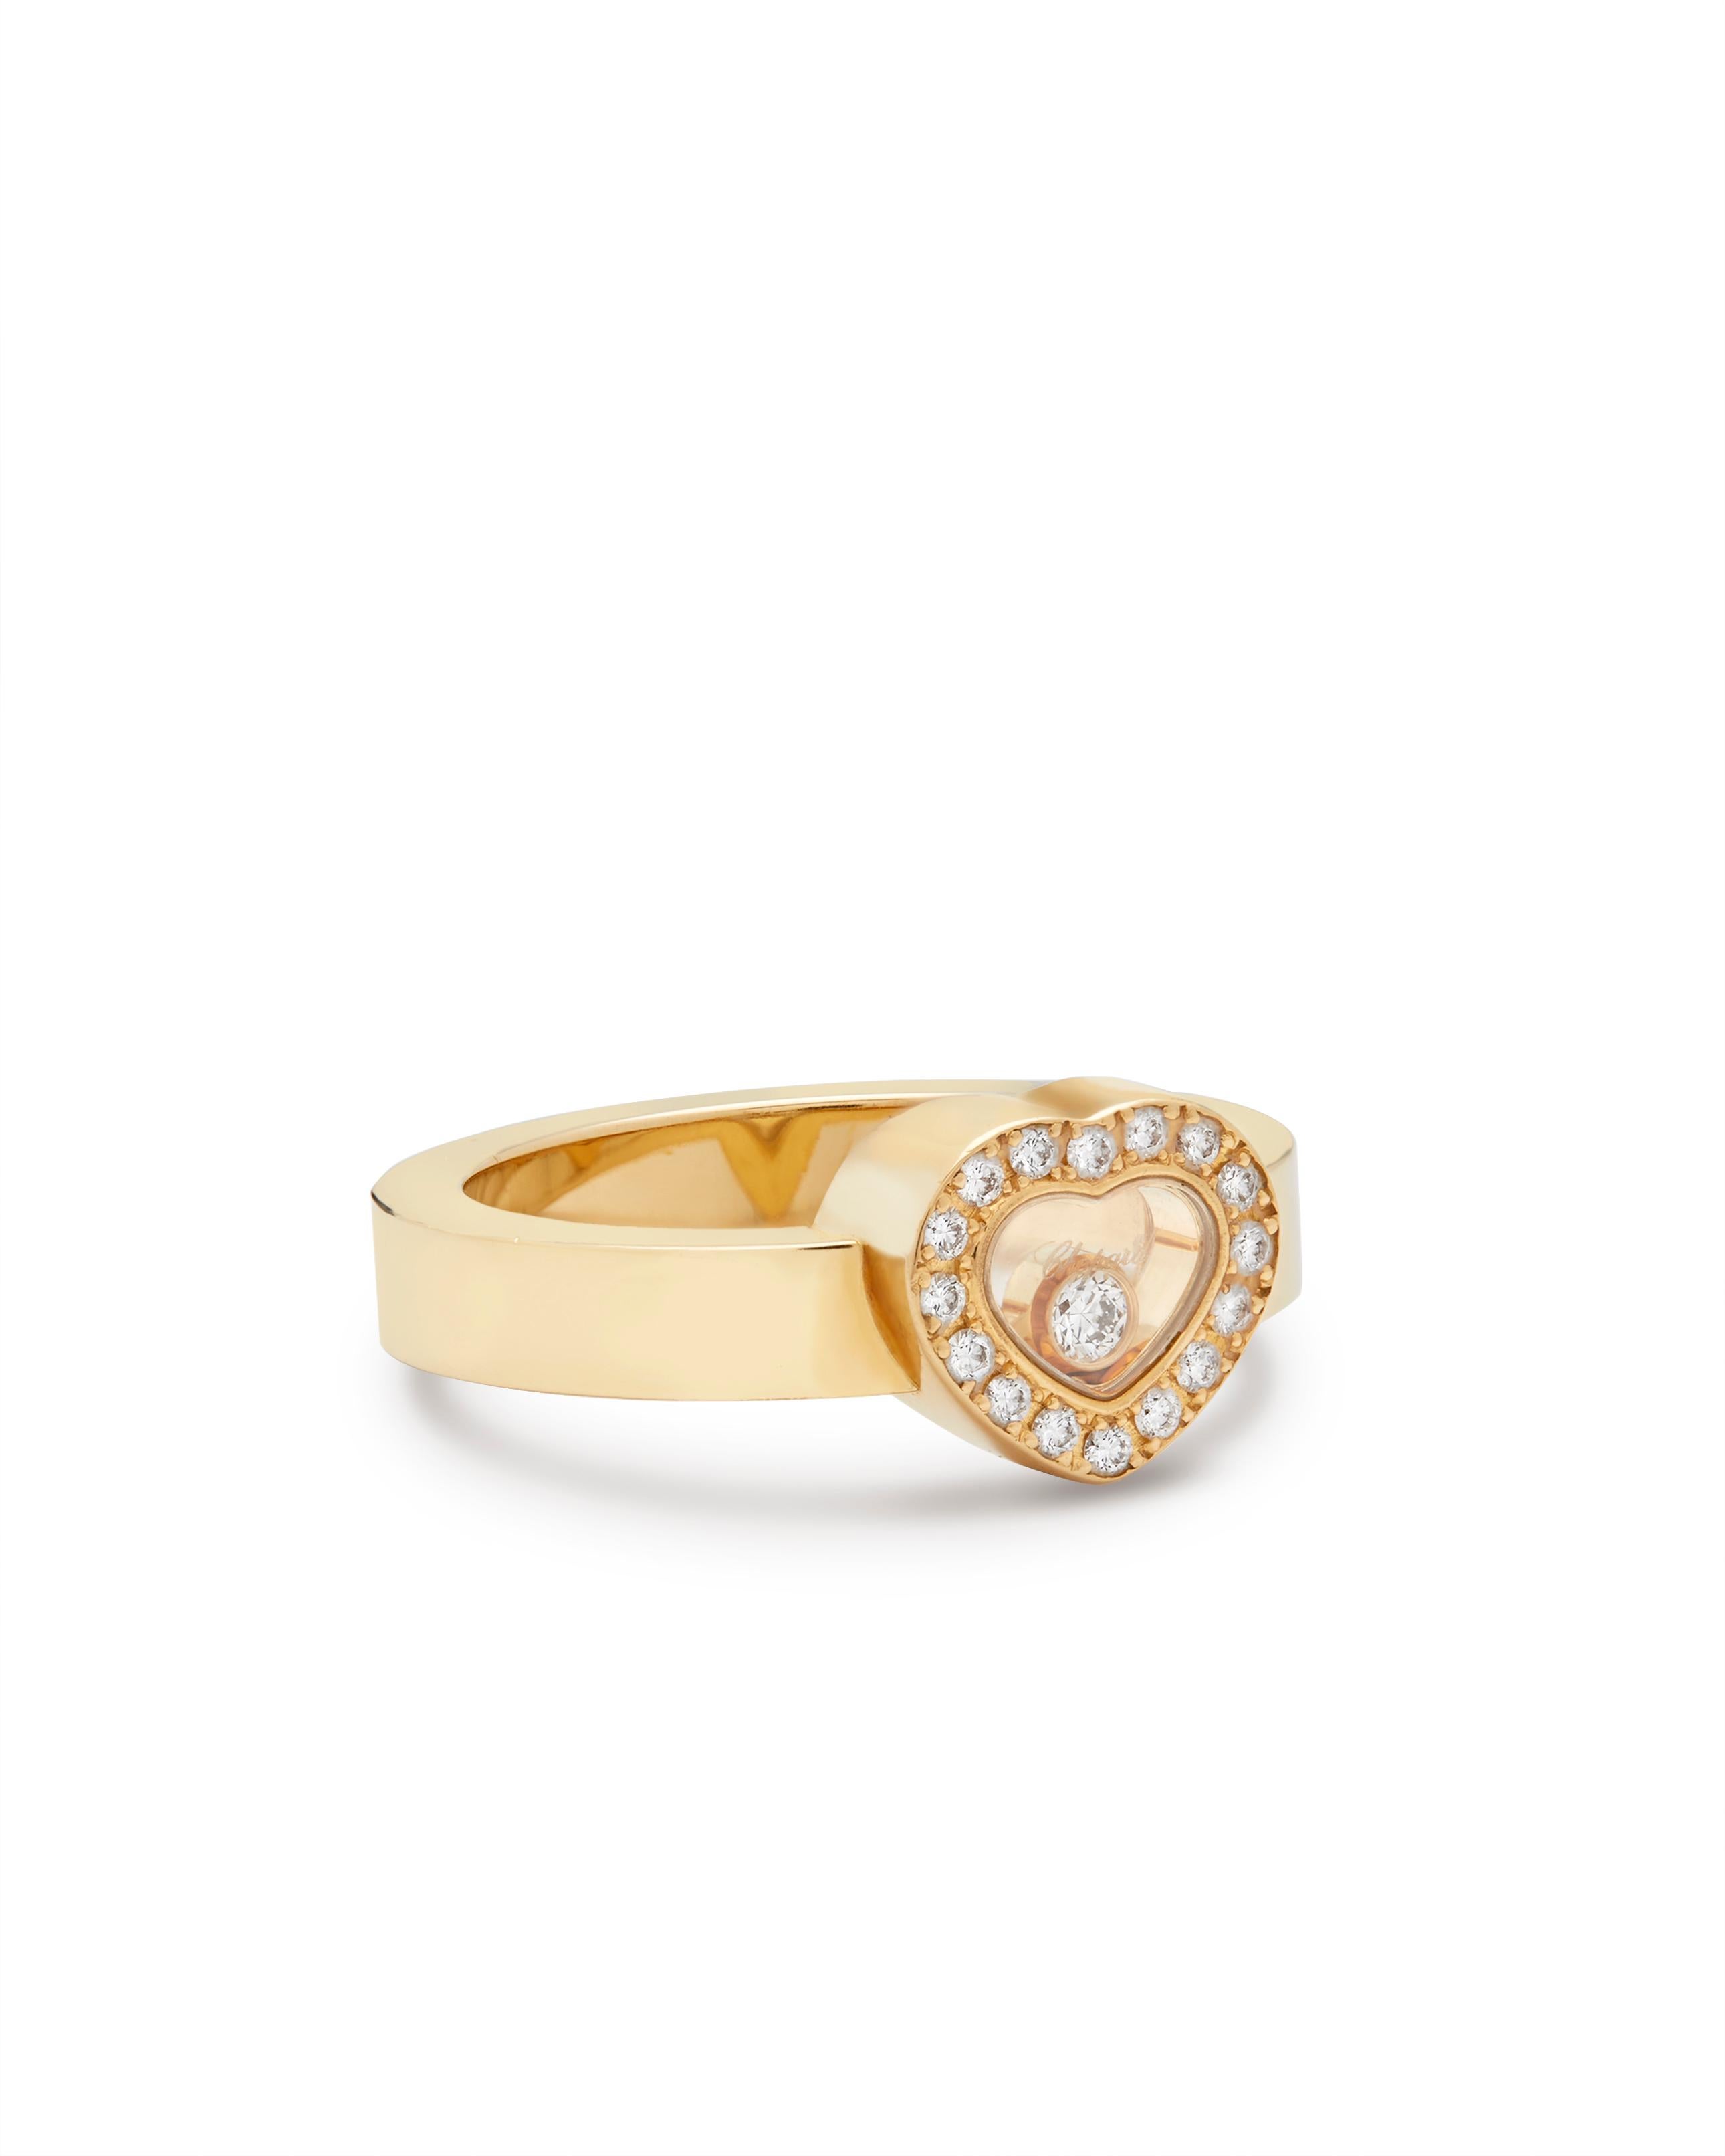 Chopard Happy diamond ring.

The iconic Happy Diamond ring, daring as they are fun, the Diamond freely moving in-between two Sapphire crystals. A token a beautiful taken of Free-spirited Love and devotion. 

18ct Yellow gold set with 17 Diamonds